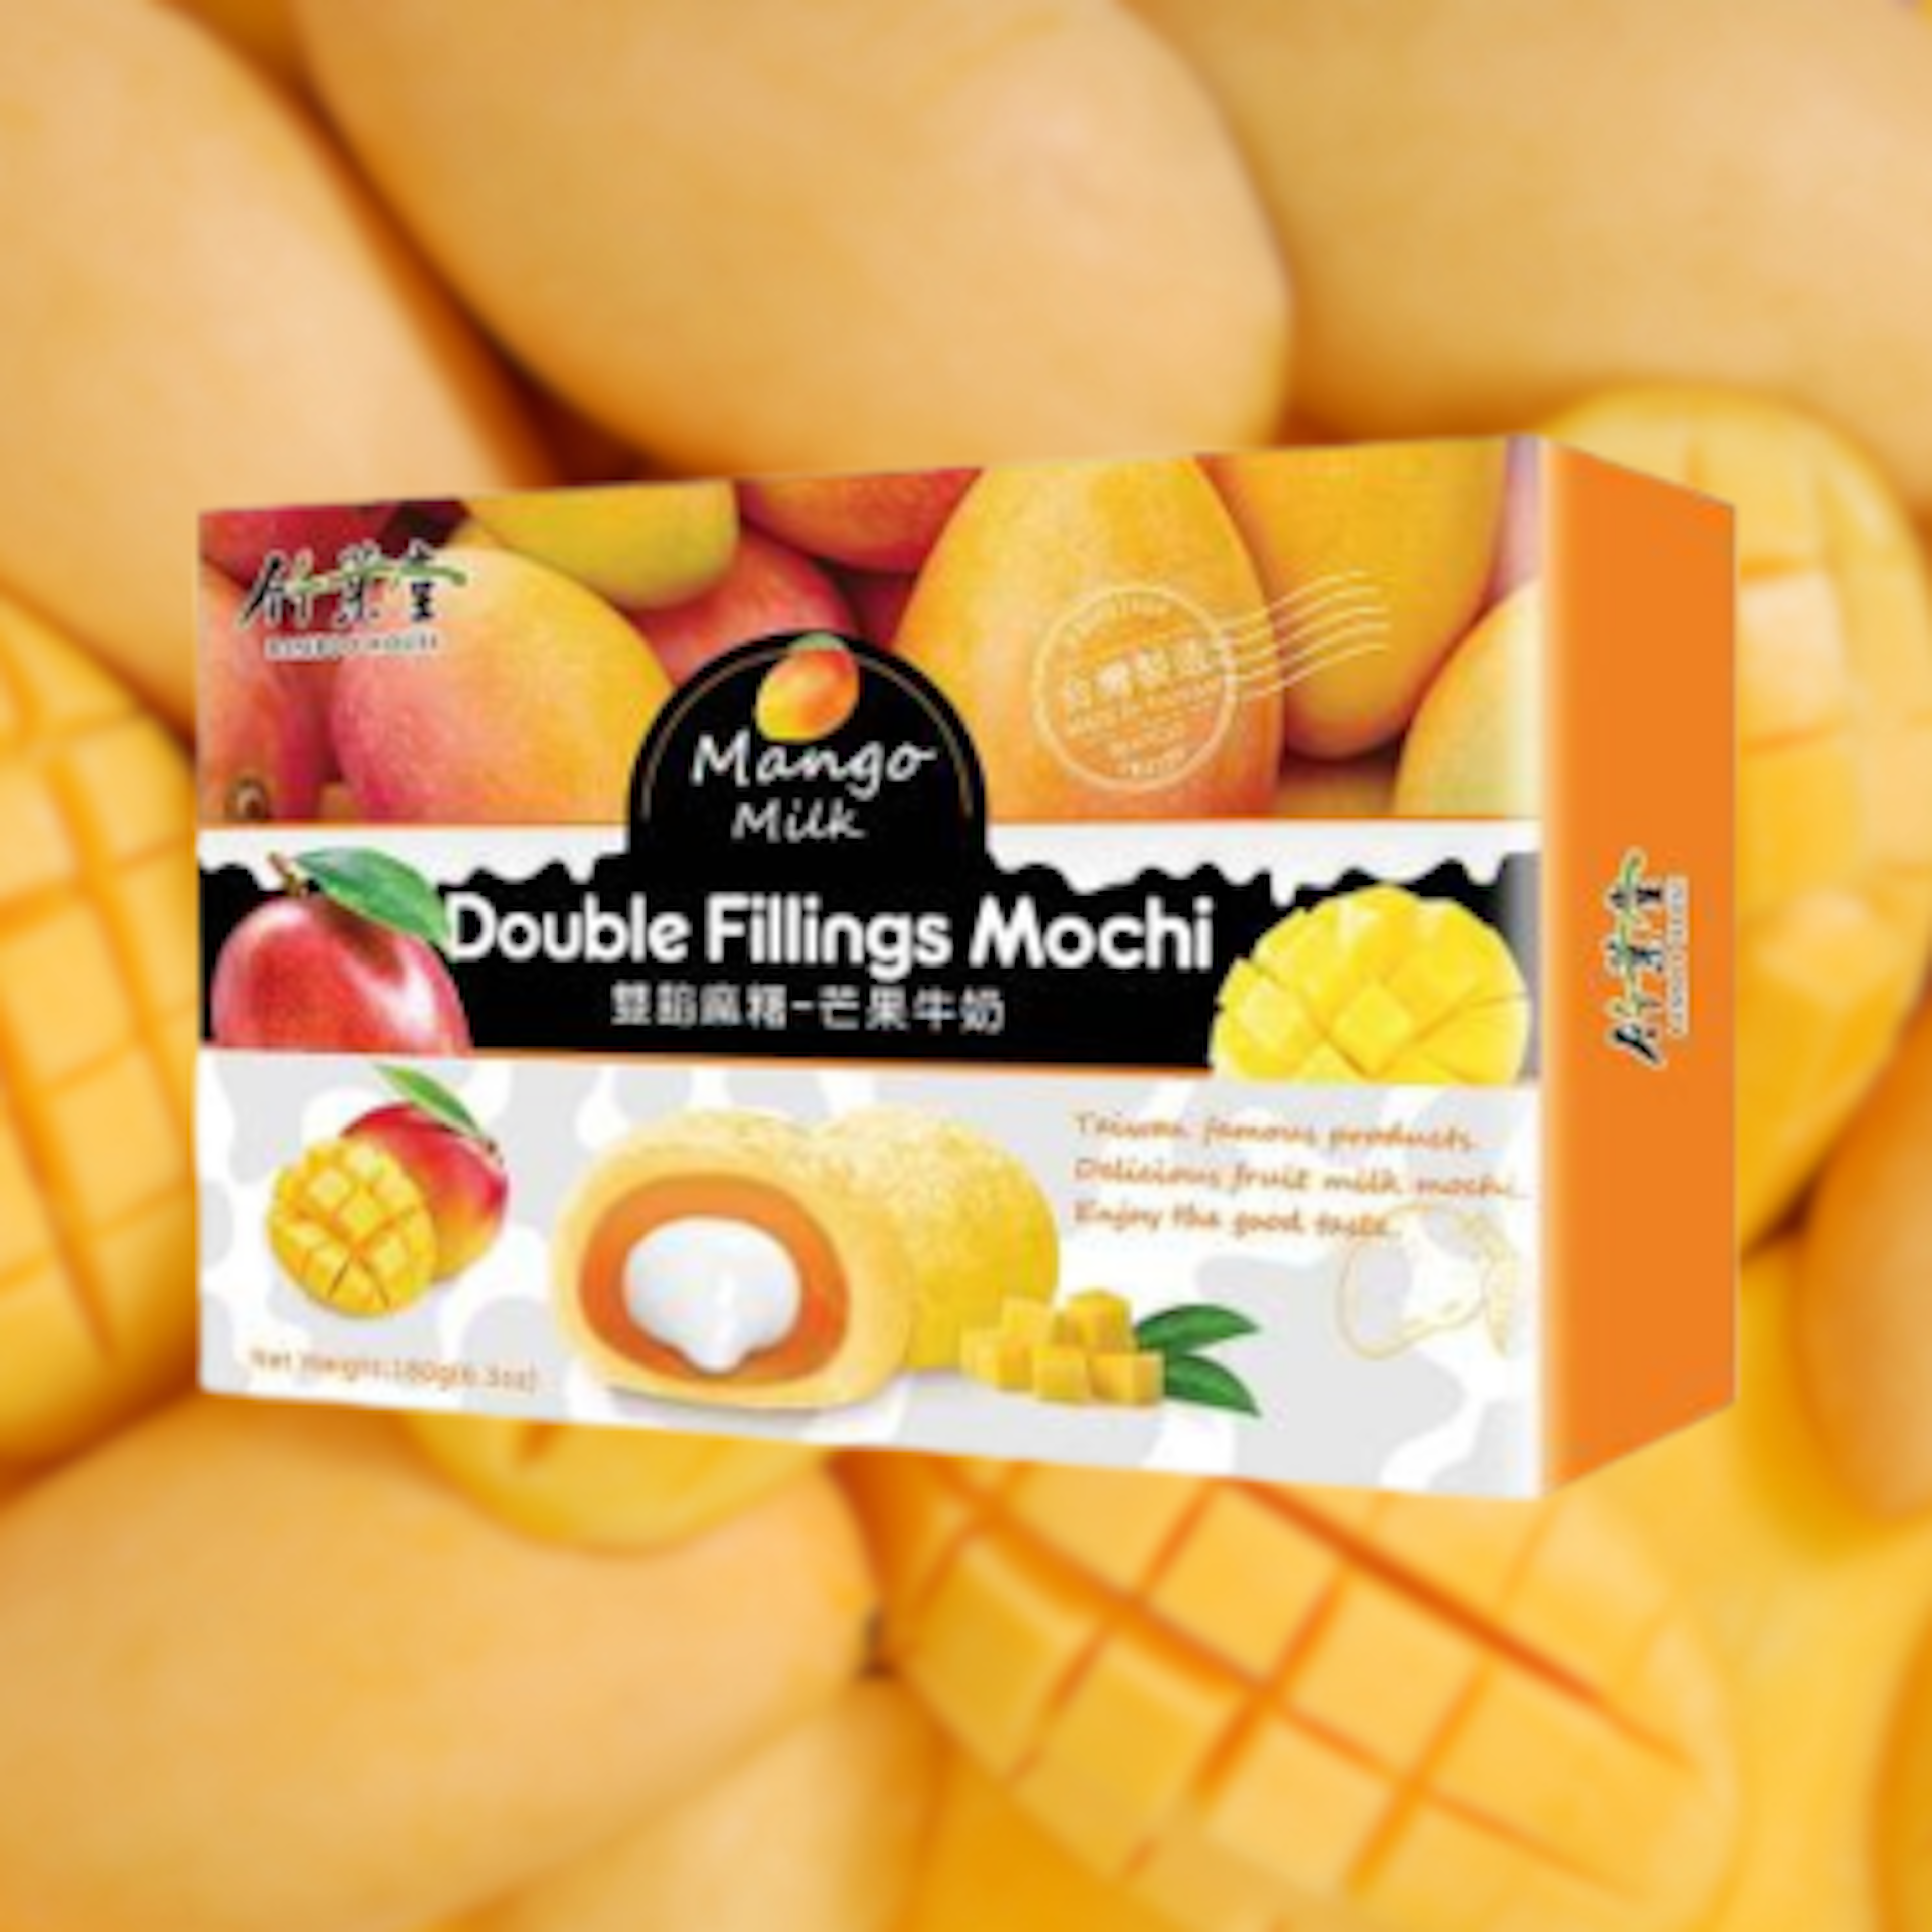 Bamboo House Double Fillings Mochi Mango Milk 180g - Delicious and Tender Japanese Sweet